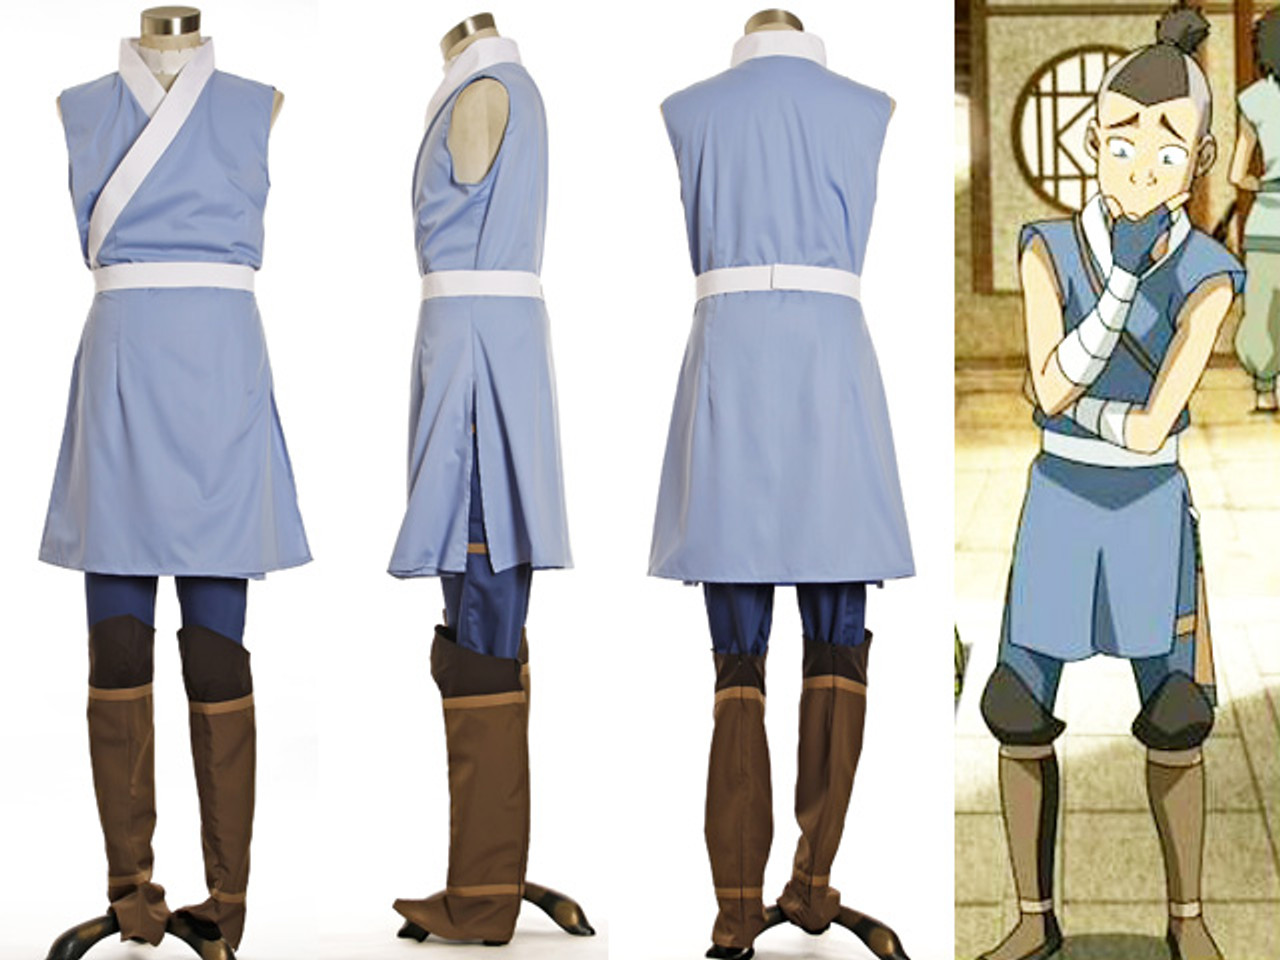 Avatar The Last Airbender Ty Lee Cosplay Costume | Costume 